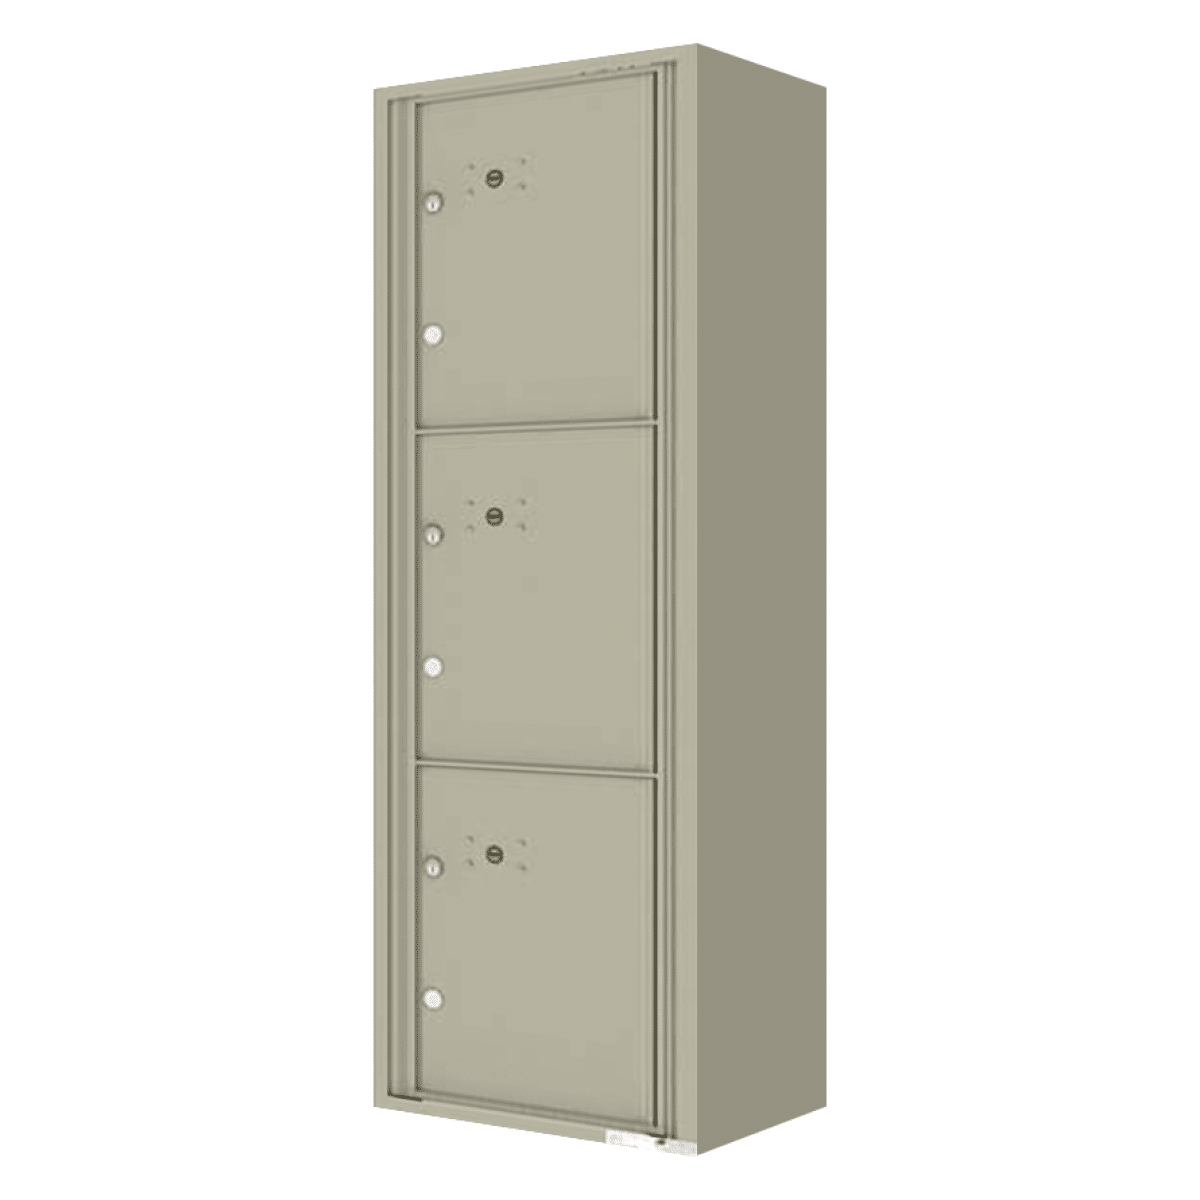 Surface Mount 4C Horizontal Mailbox – 3 Parcel Lockers – Front Loading – 4C15S-3P-SM Product Image